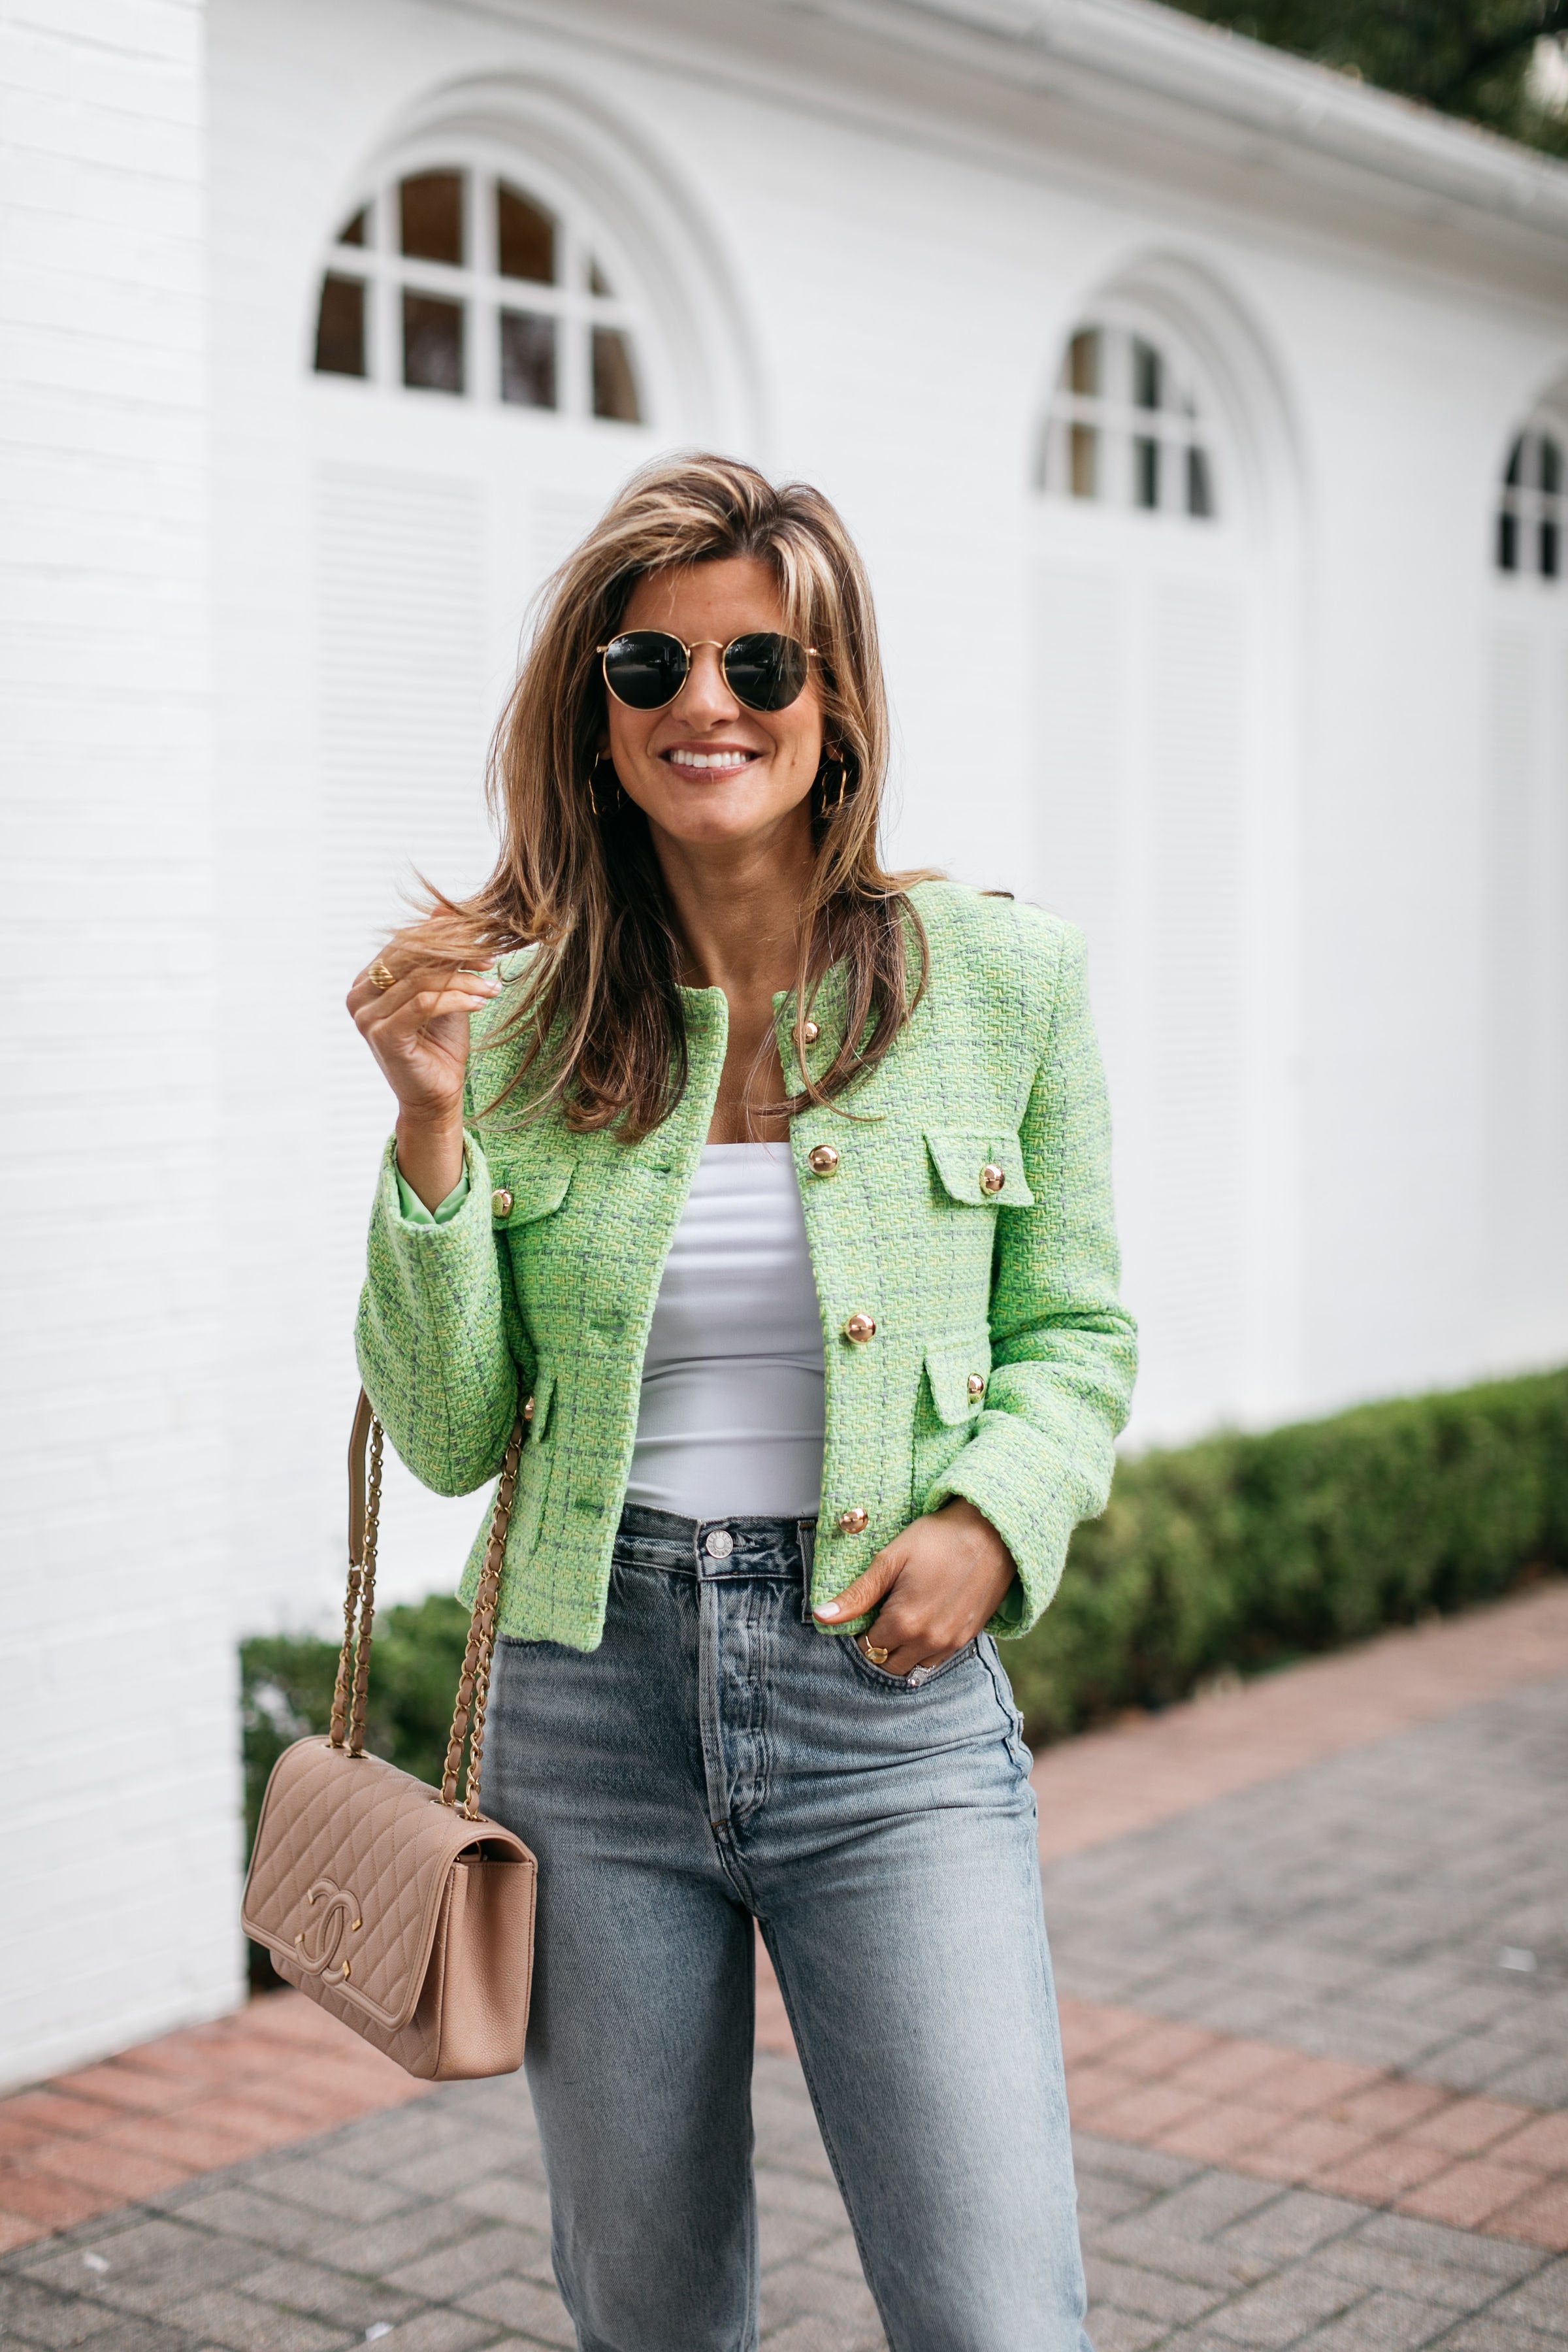 Find Out Where To Get The Bag  Tweed jacket outfit, Fashion